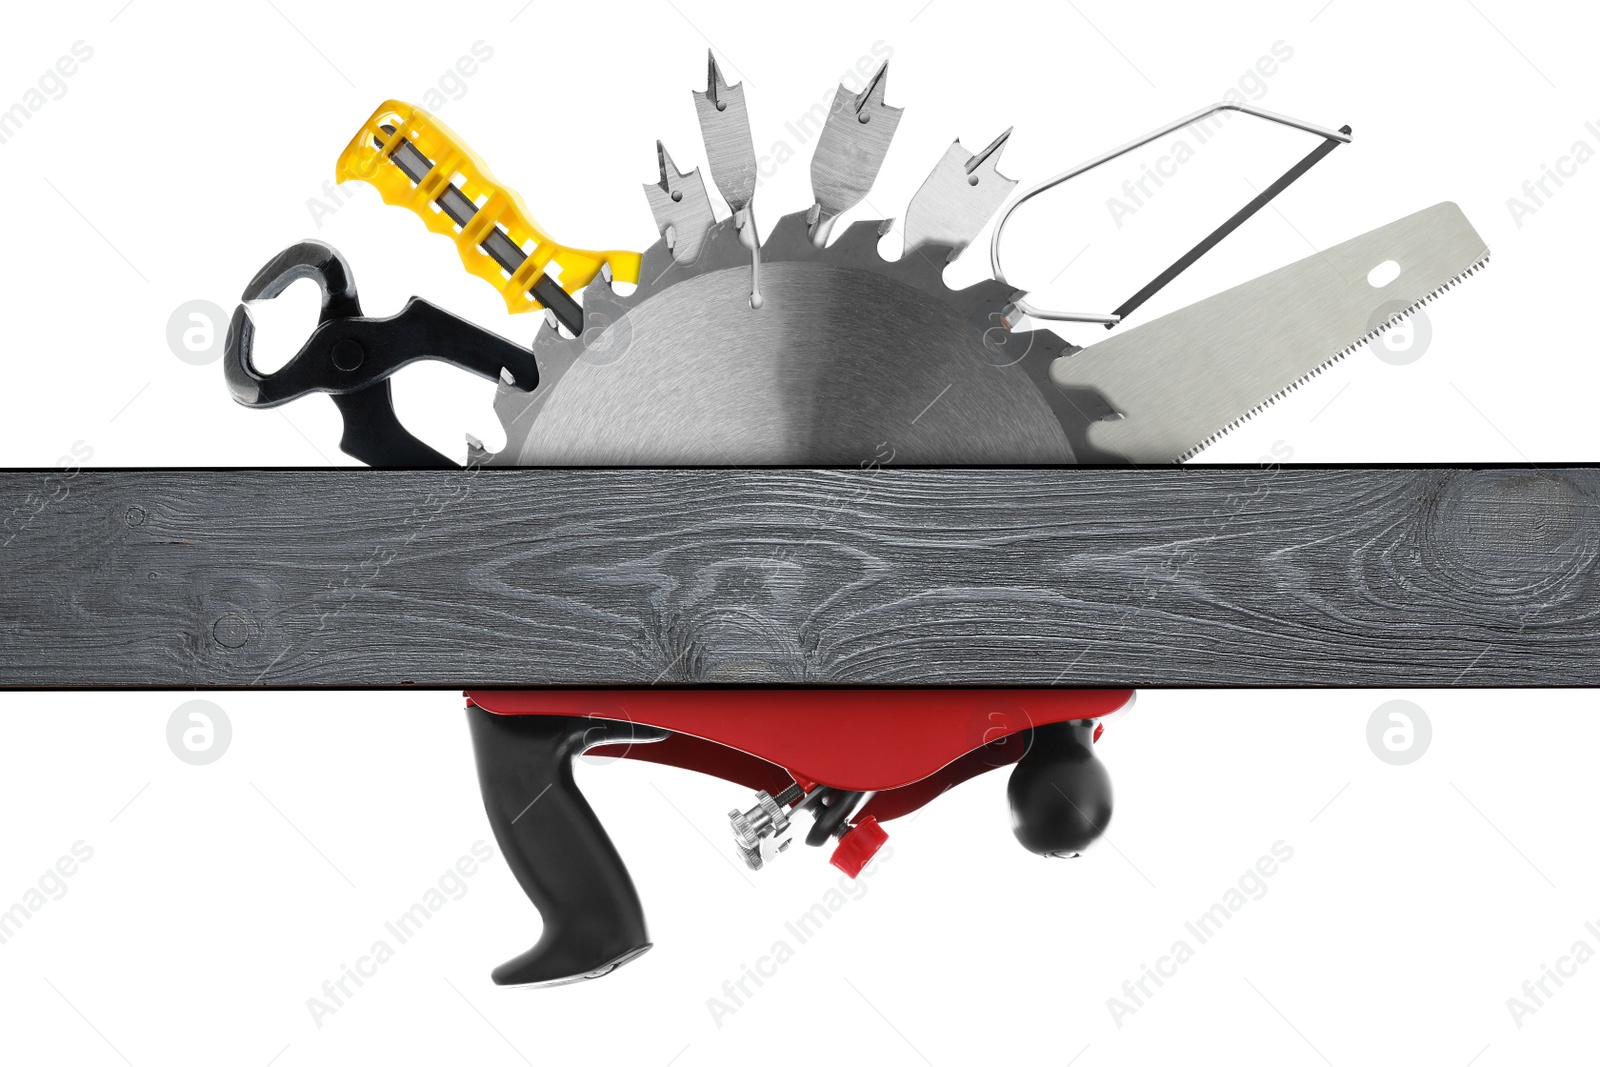 Image of Carpentry tools and wooden surface on white background, collage